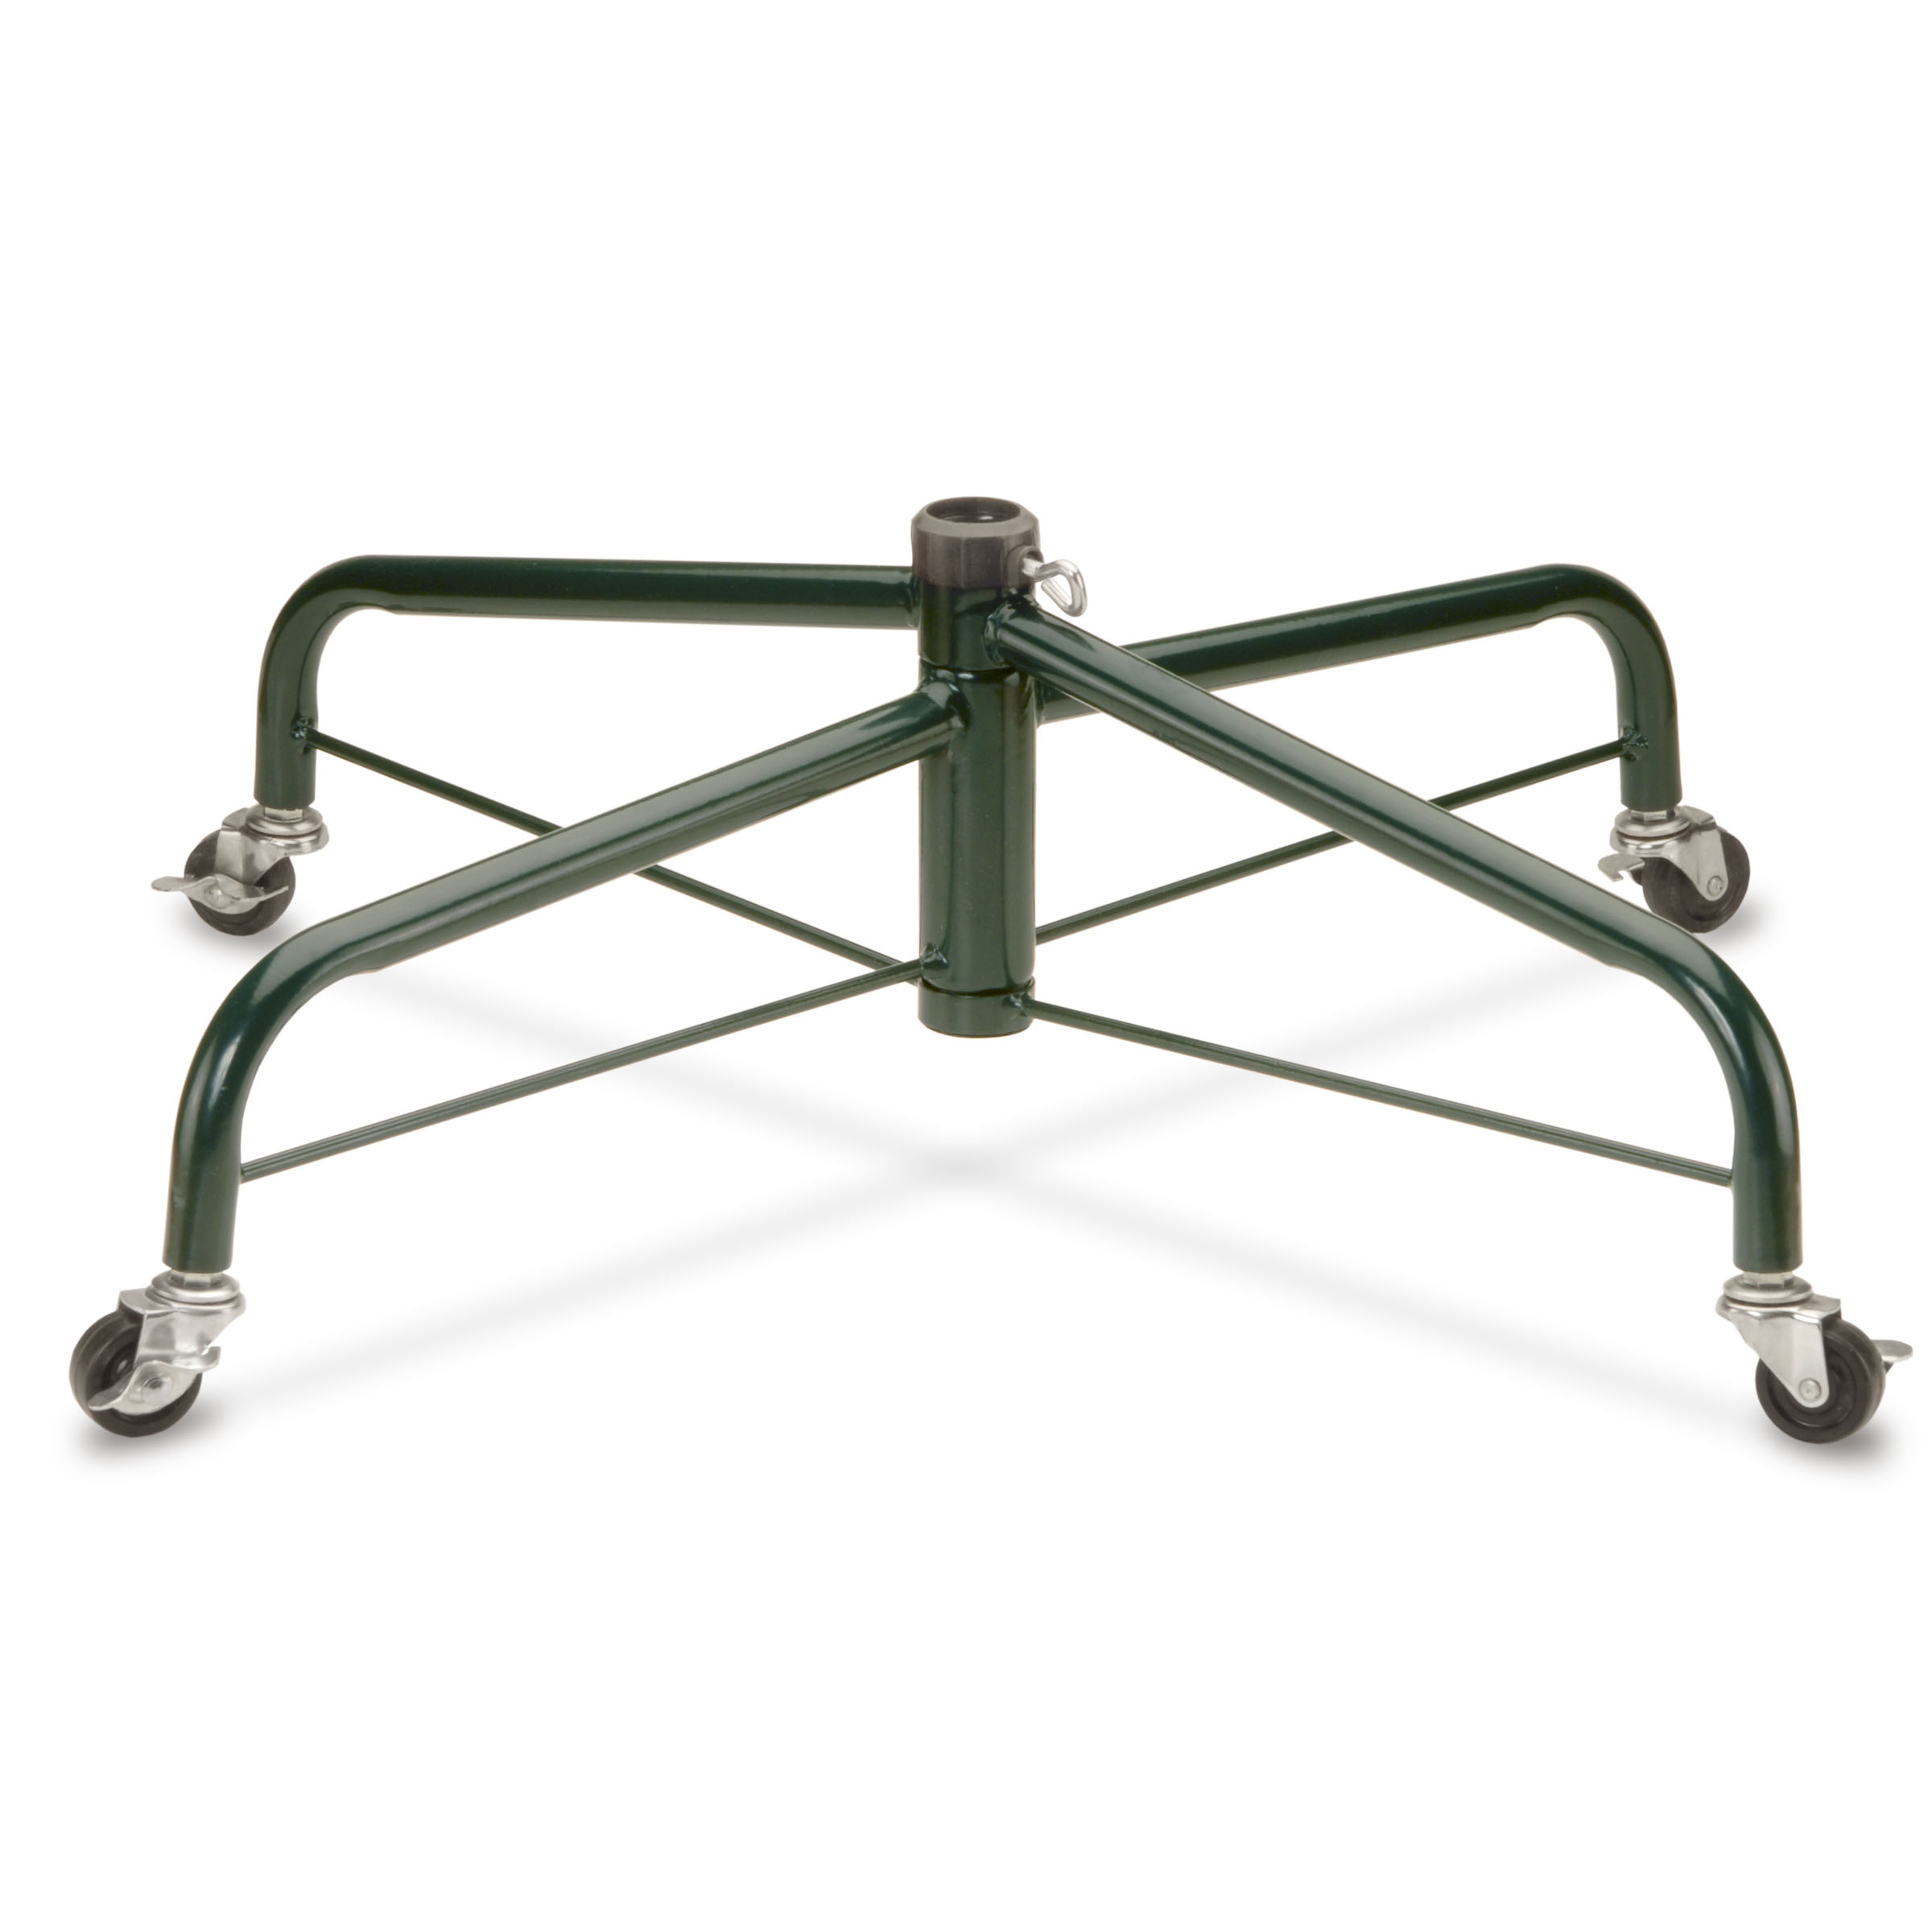 28 Inch Folding Tree Stand W/ Rolling Wheels For 7.5 Ft To 8 Ft Trees: Fits 1.25 Inch Pole